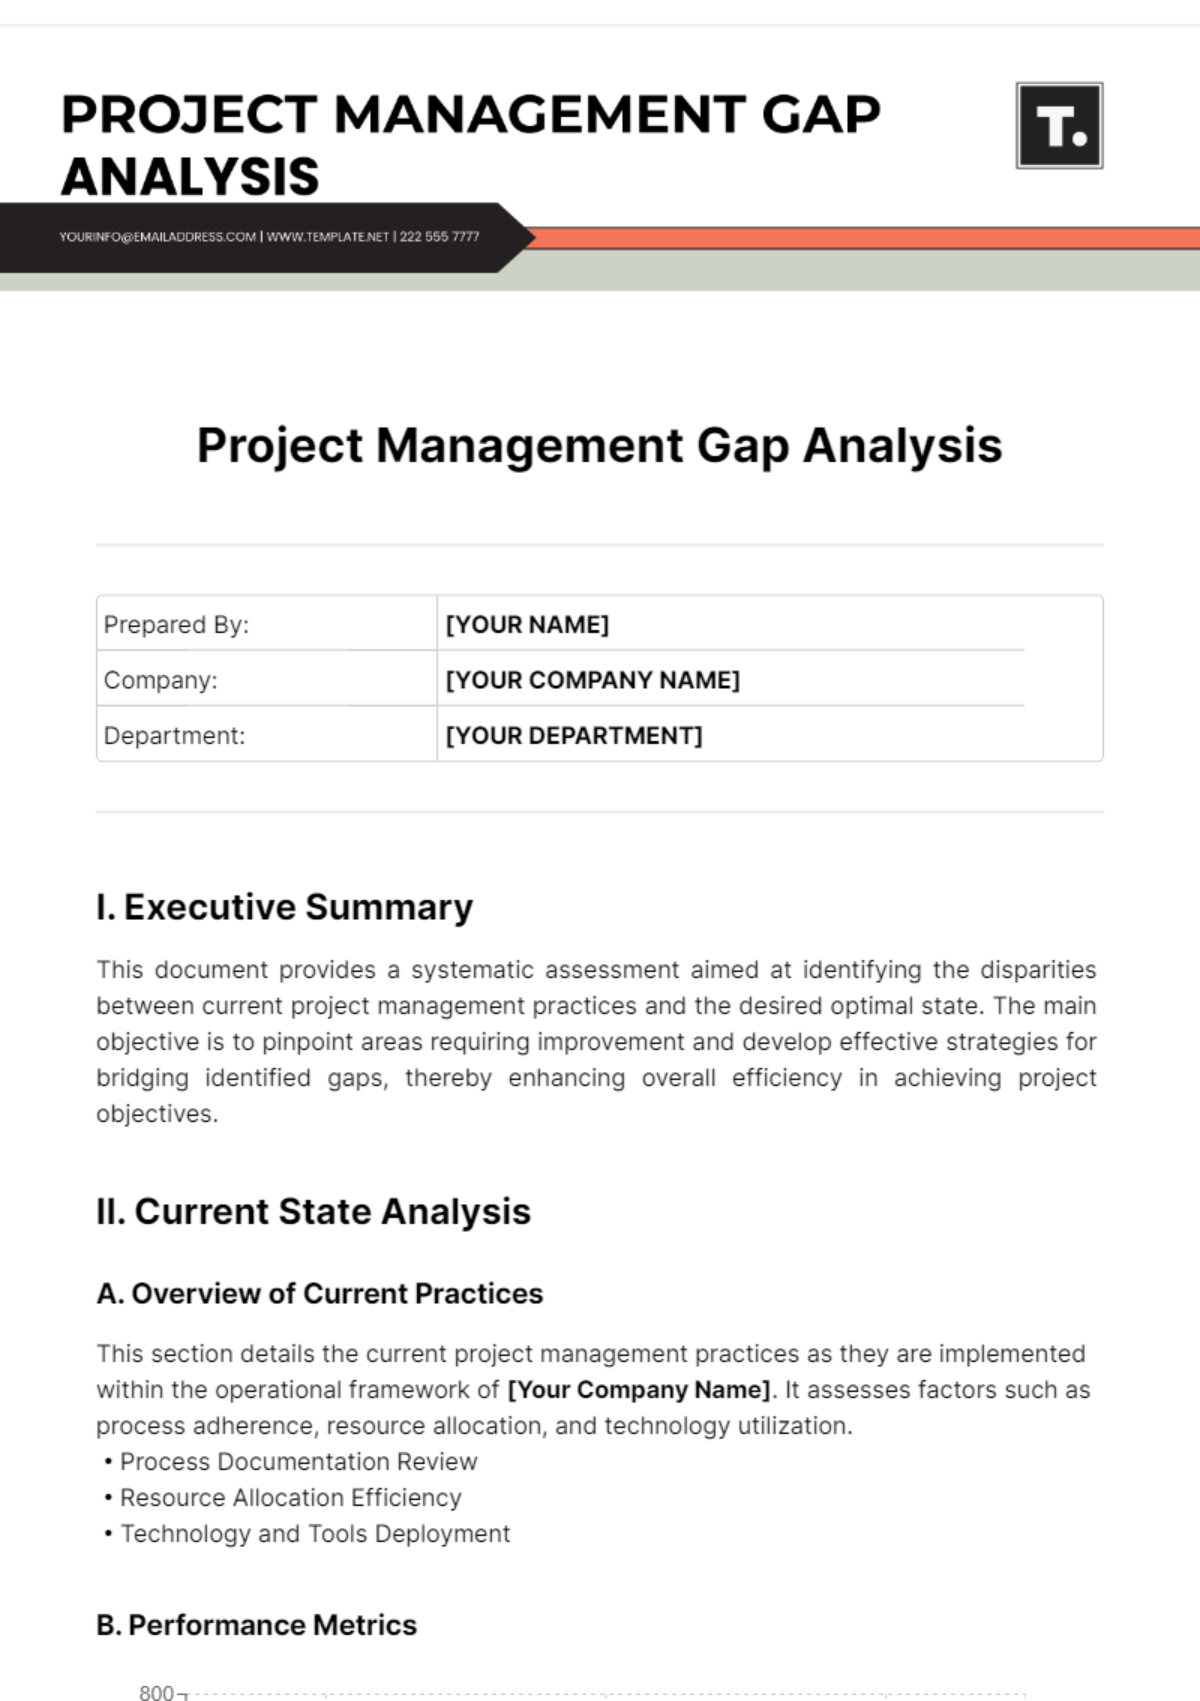 Project Management Gap Analysis Template